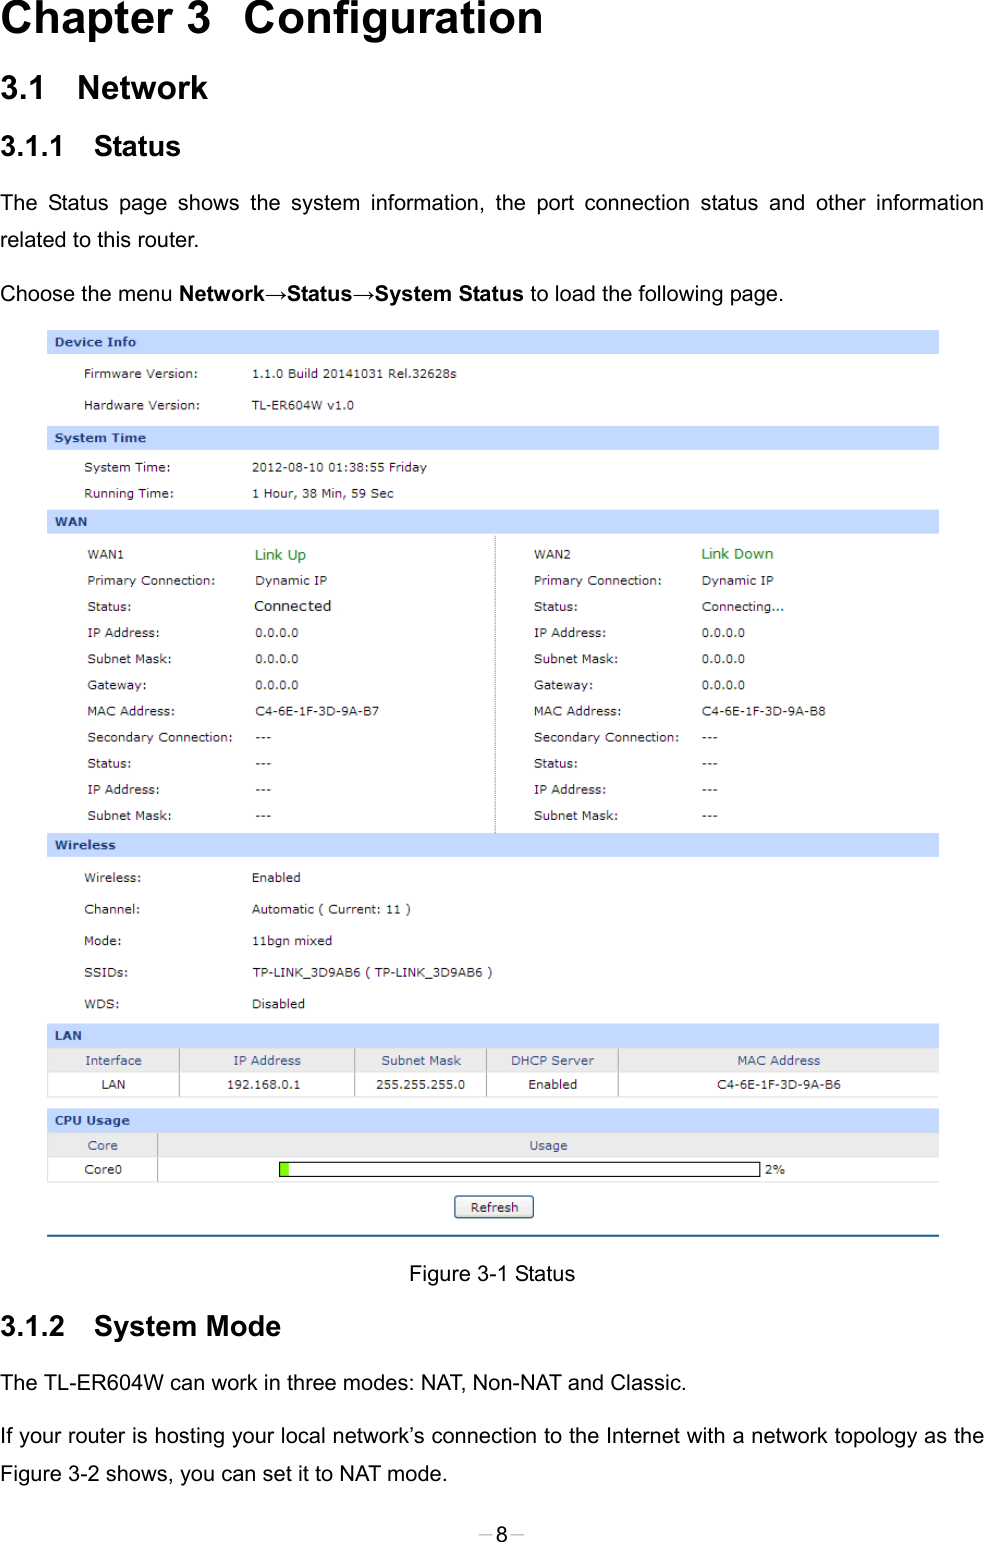  Chapter 3  Configuration 3.1  Network 3.1.1 Status The Status page shows the system information, the port connection status and other information related to this router. Choose the menu Network→Status→System Status to load the following page.  Figure 3-1 Status 3.1.2 System Mode The TL-ER604W can work in three modes: NAT, Non-NAT and Classic. If your router is hosting your local network’s connection to the Internet with a network topology as the Figure 3-2 shows, you can set it to NAT mode.   -8- 